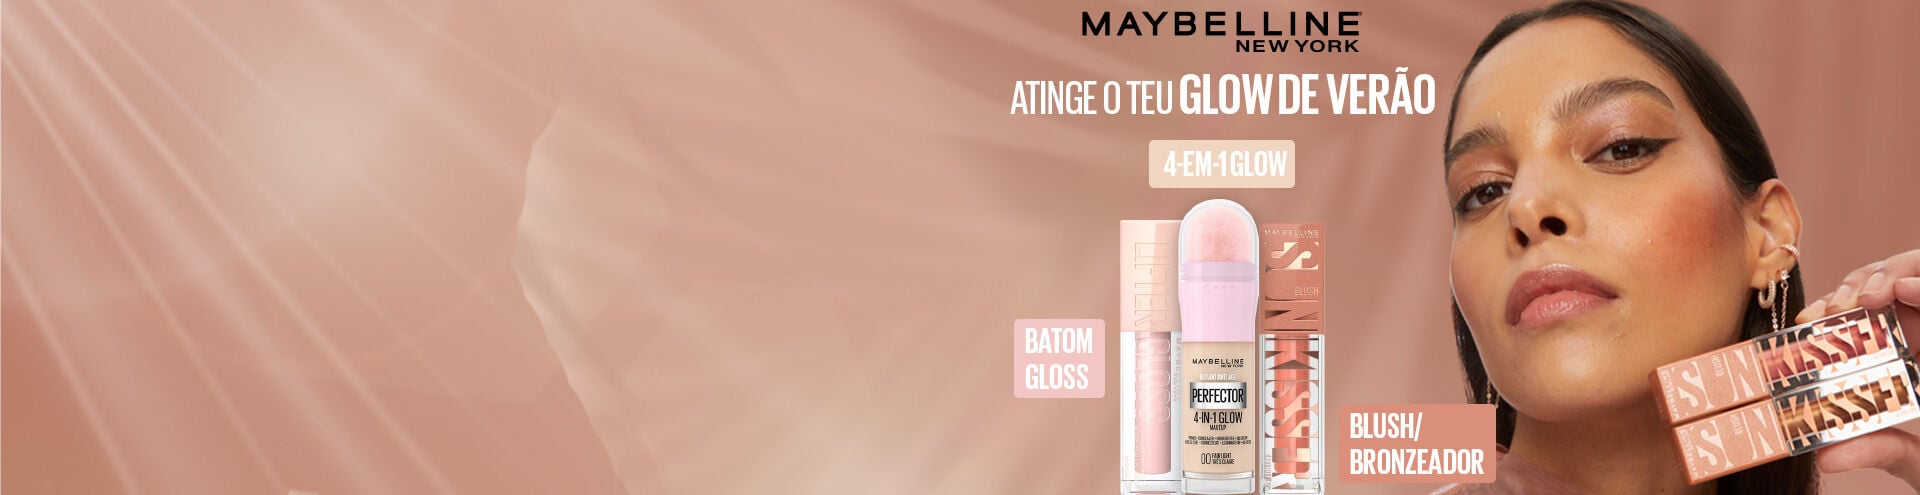 SPW Maybelline - HP